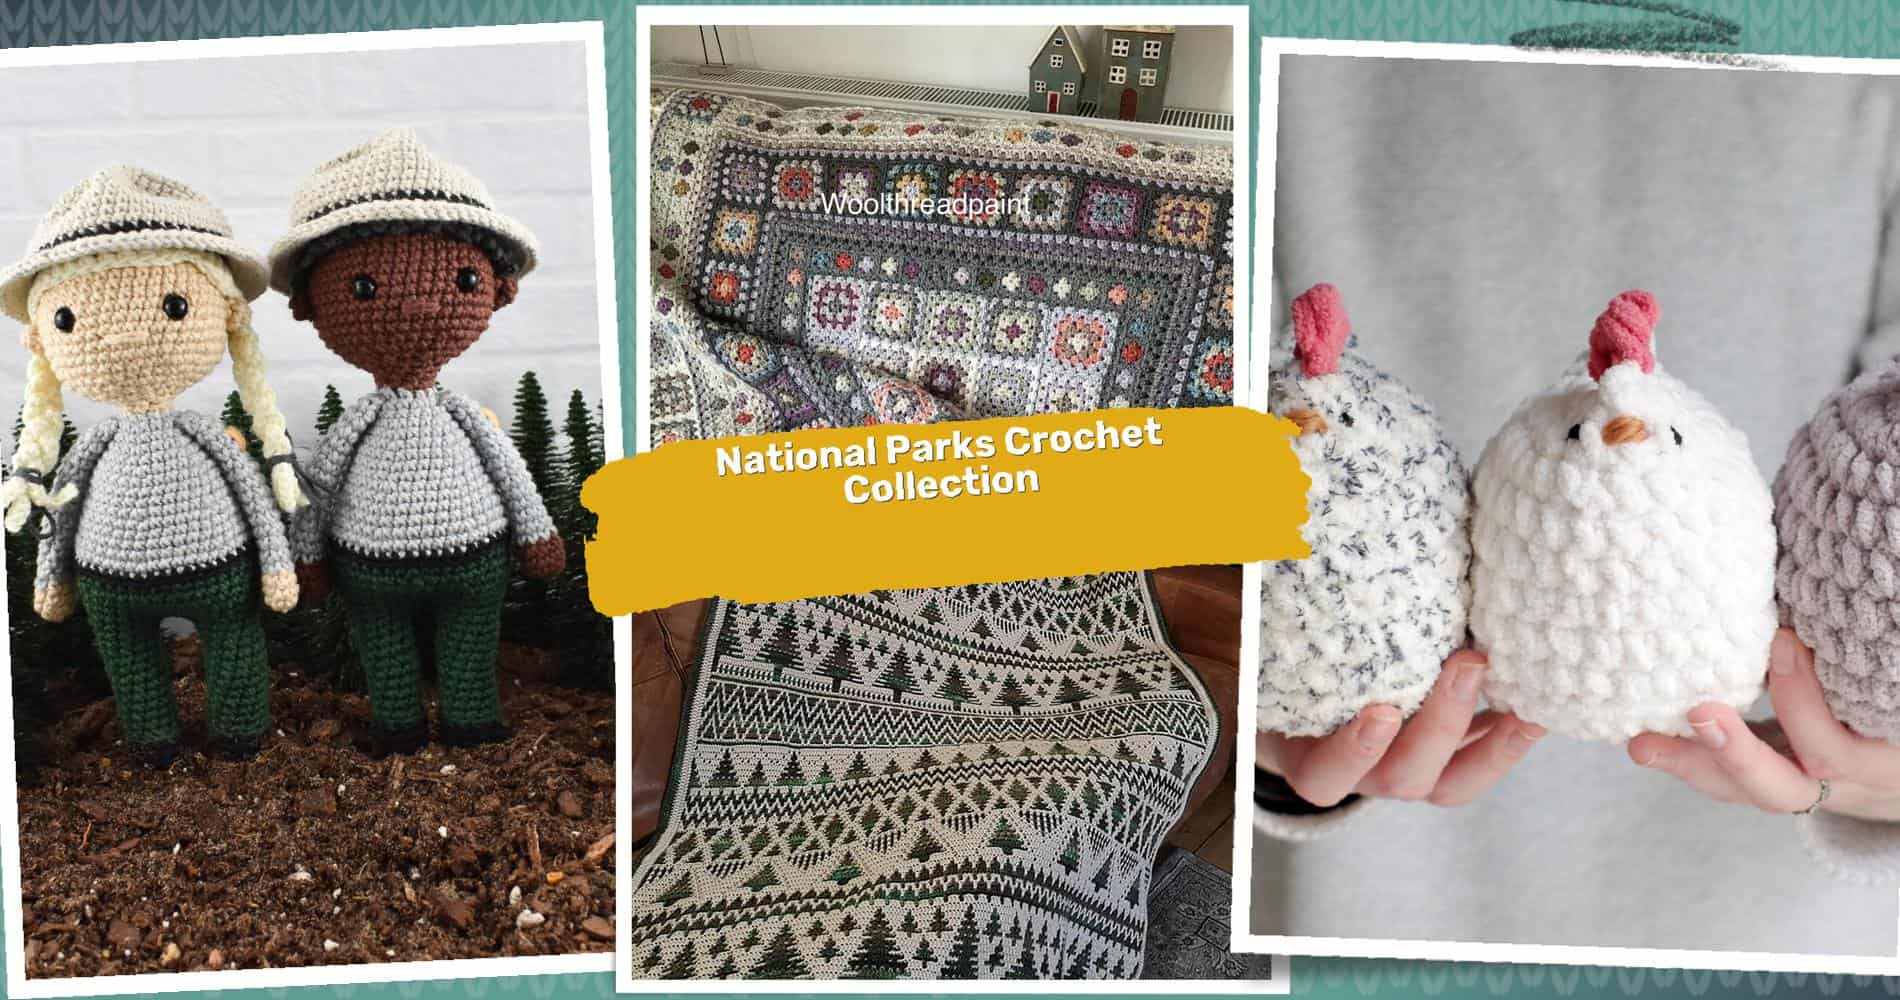 39 National Park Crochet Patterns: Capture America's Beauty with Yarn